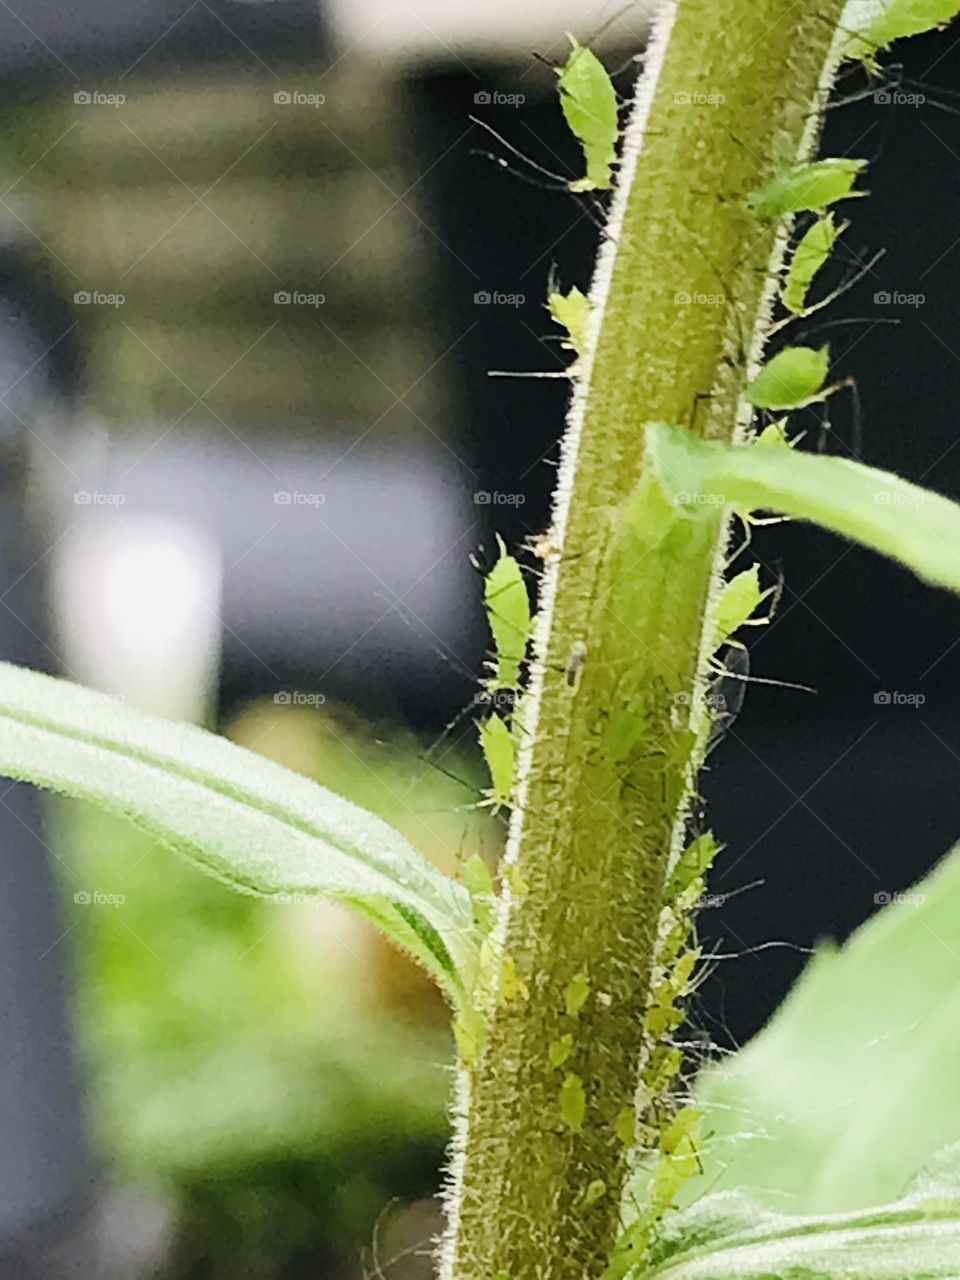 Aphids on blade of grass